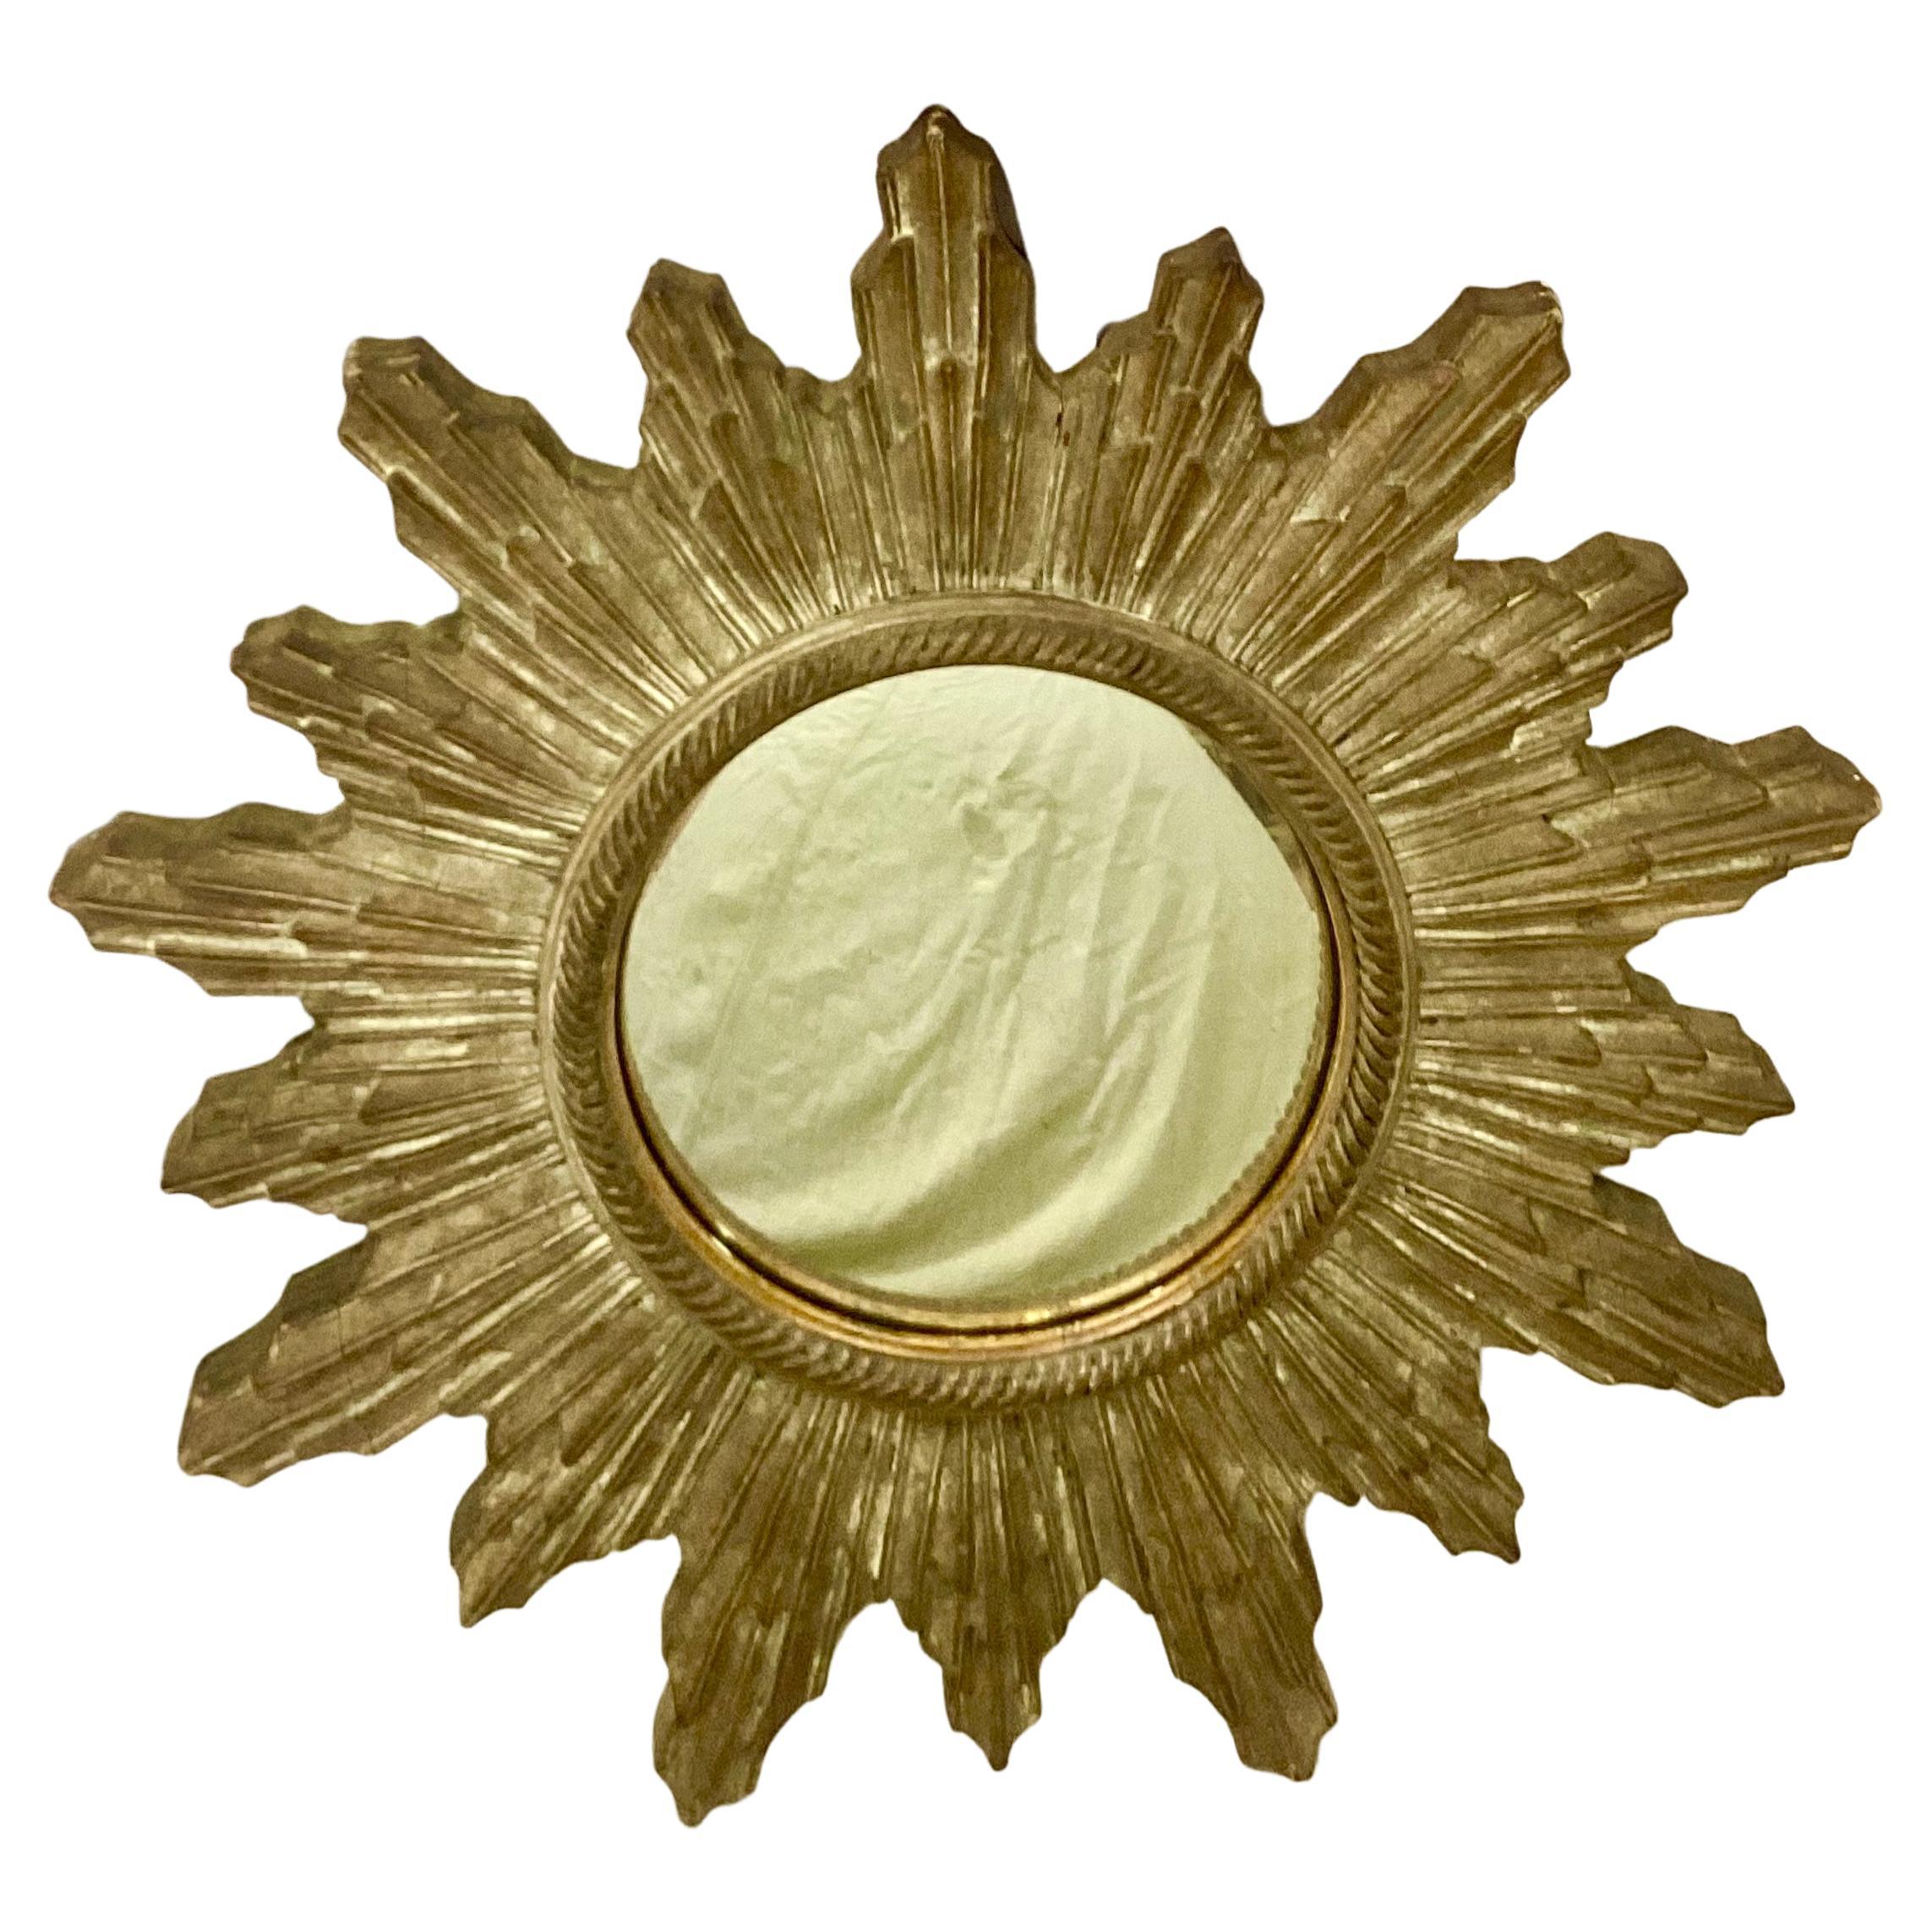 20th century Italian neoclassical sunburst wall mirror. Wonderful old patinated wooden frame. Good condition.